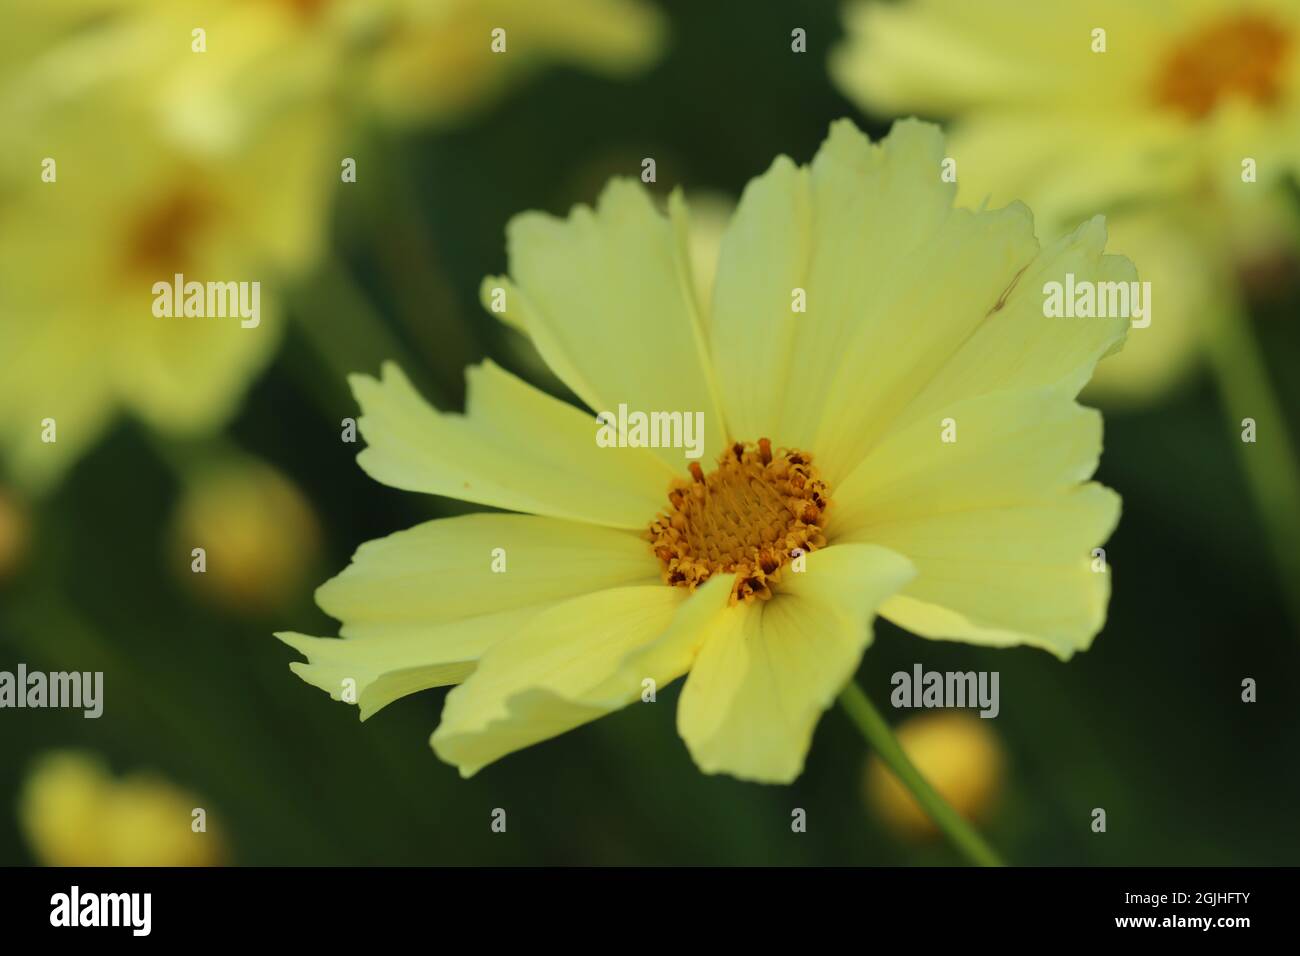 close-up of a light yellow flower of coreopsis lanceolata against a blurred green and yellow background Stock Photo